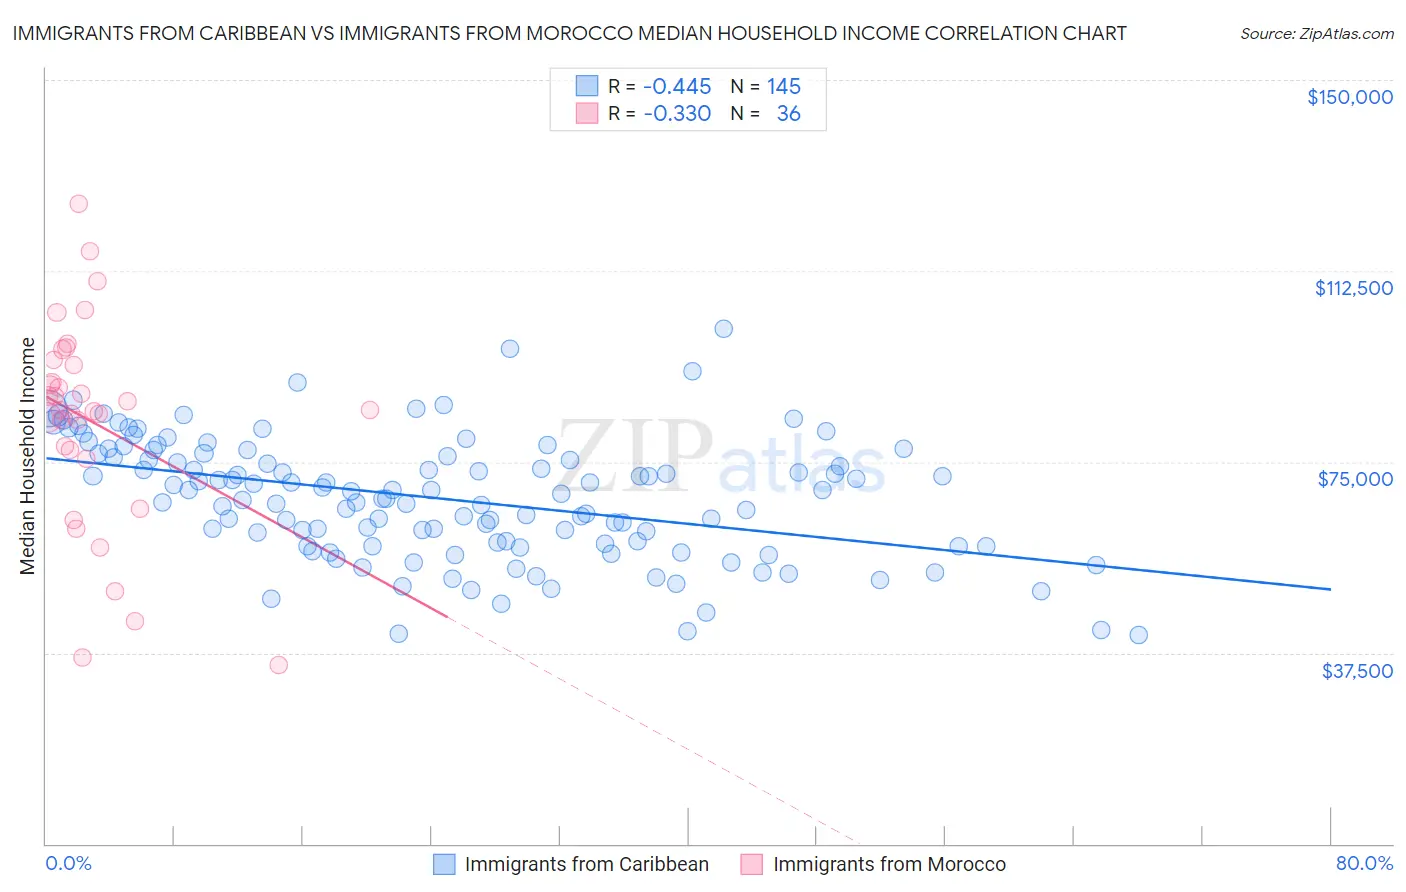 Immigrants from Caribbean vs Immigrants from Morocco Median Household Income